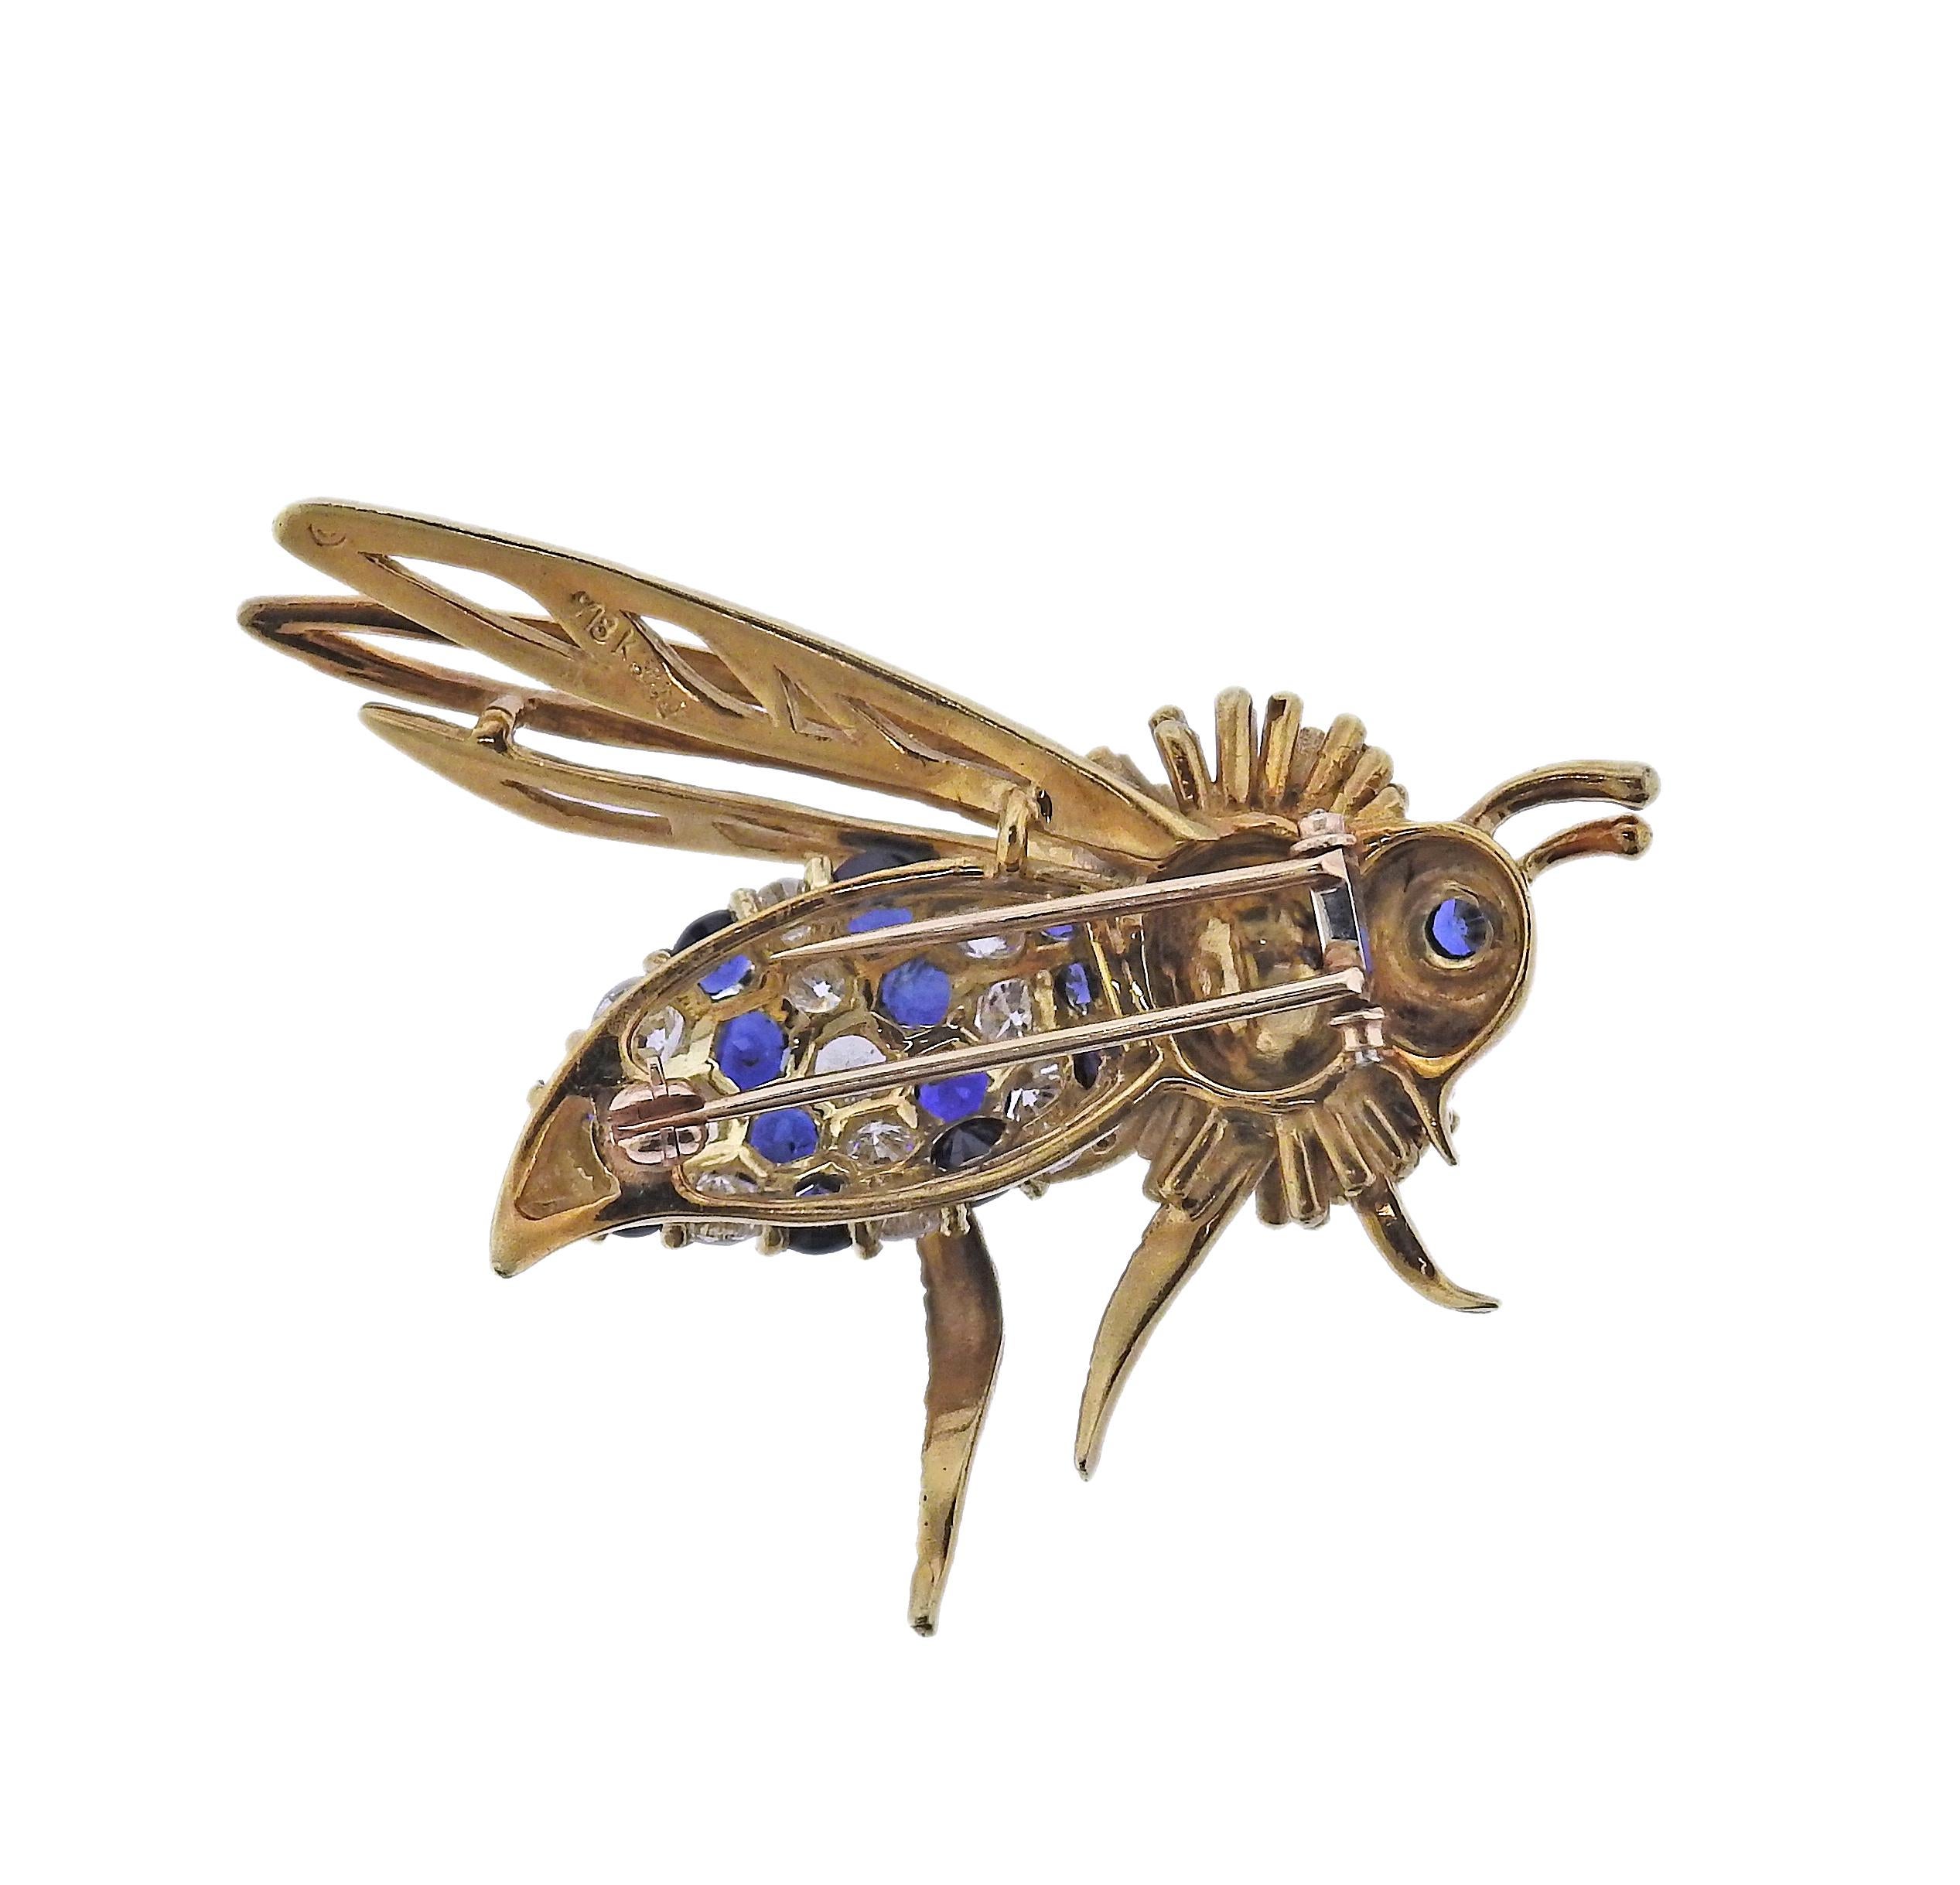 Adorable 18k gold wasp bee insect brooch, decorated with blue sapphires and approx. 2 carats in VS2-SI1/H diamonds. Brooch is 44mm x 45mm. weight - 18.7 grams. Marked: J mark, 18k, 3582. 